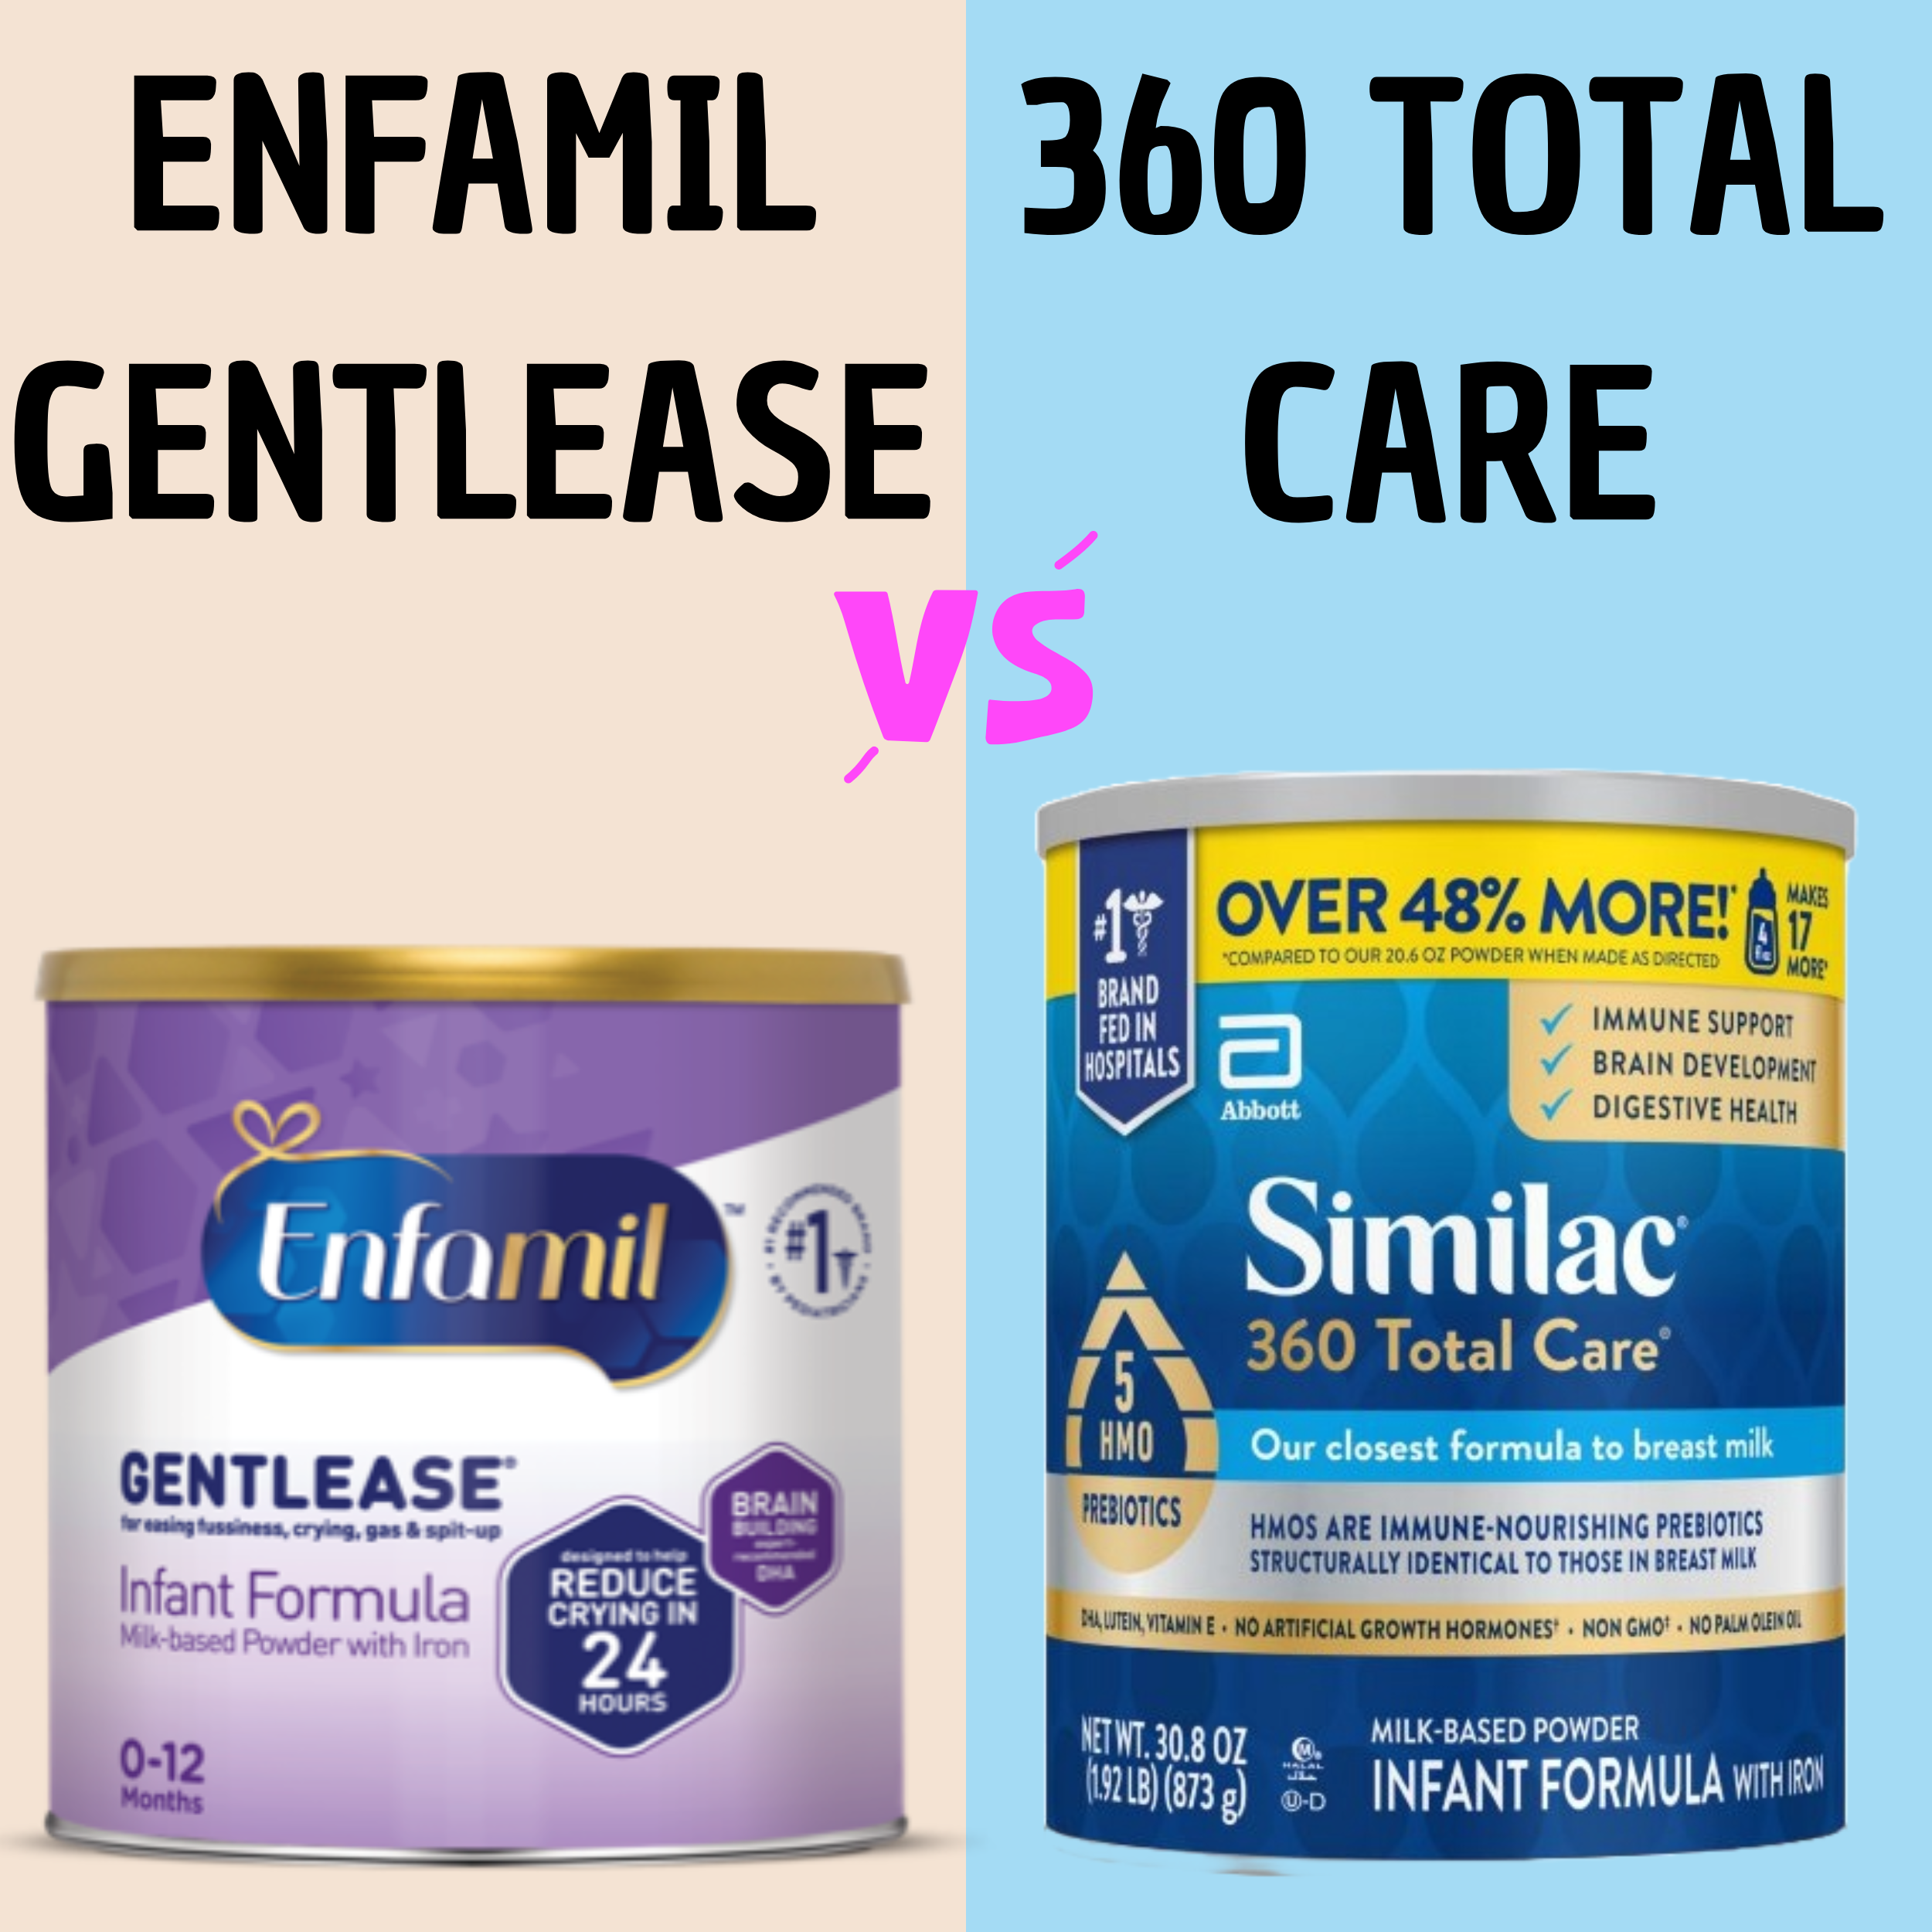 You are currently viewing Similac 360 Total Care Vs Enfamil Gentlease: Which One to Choose?